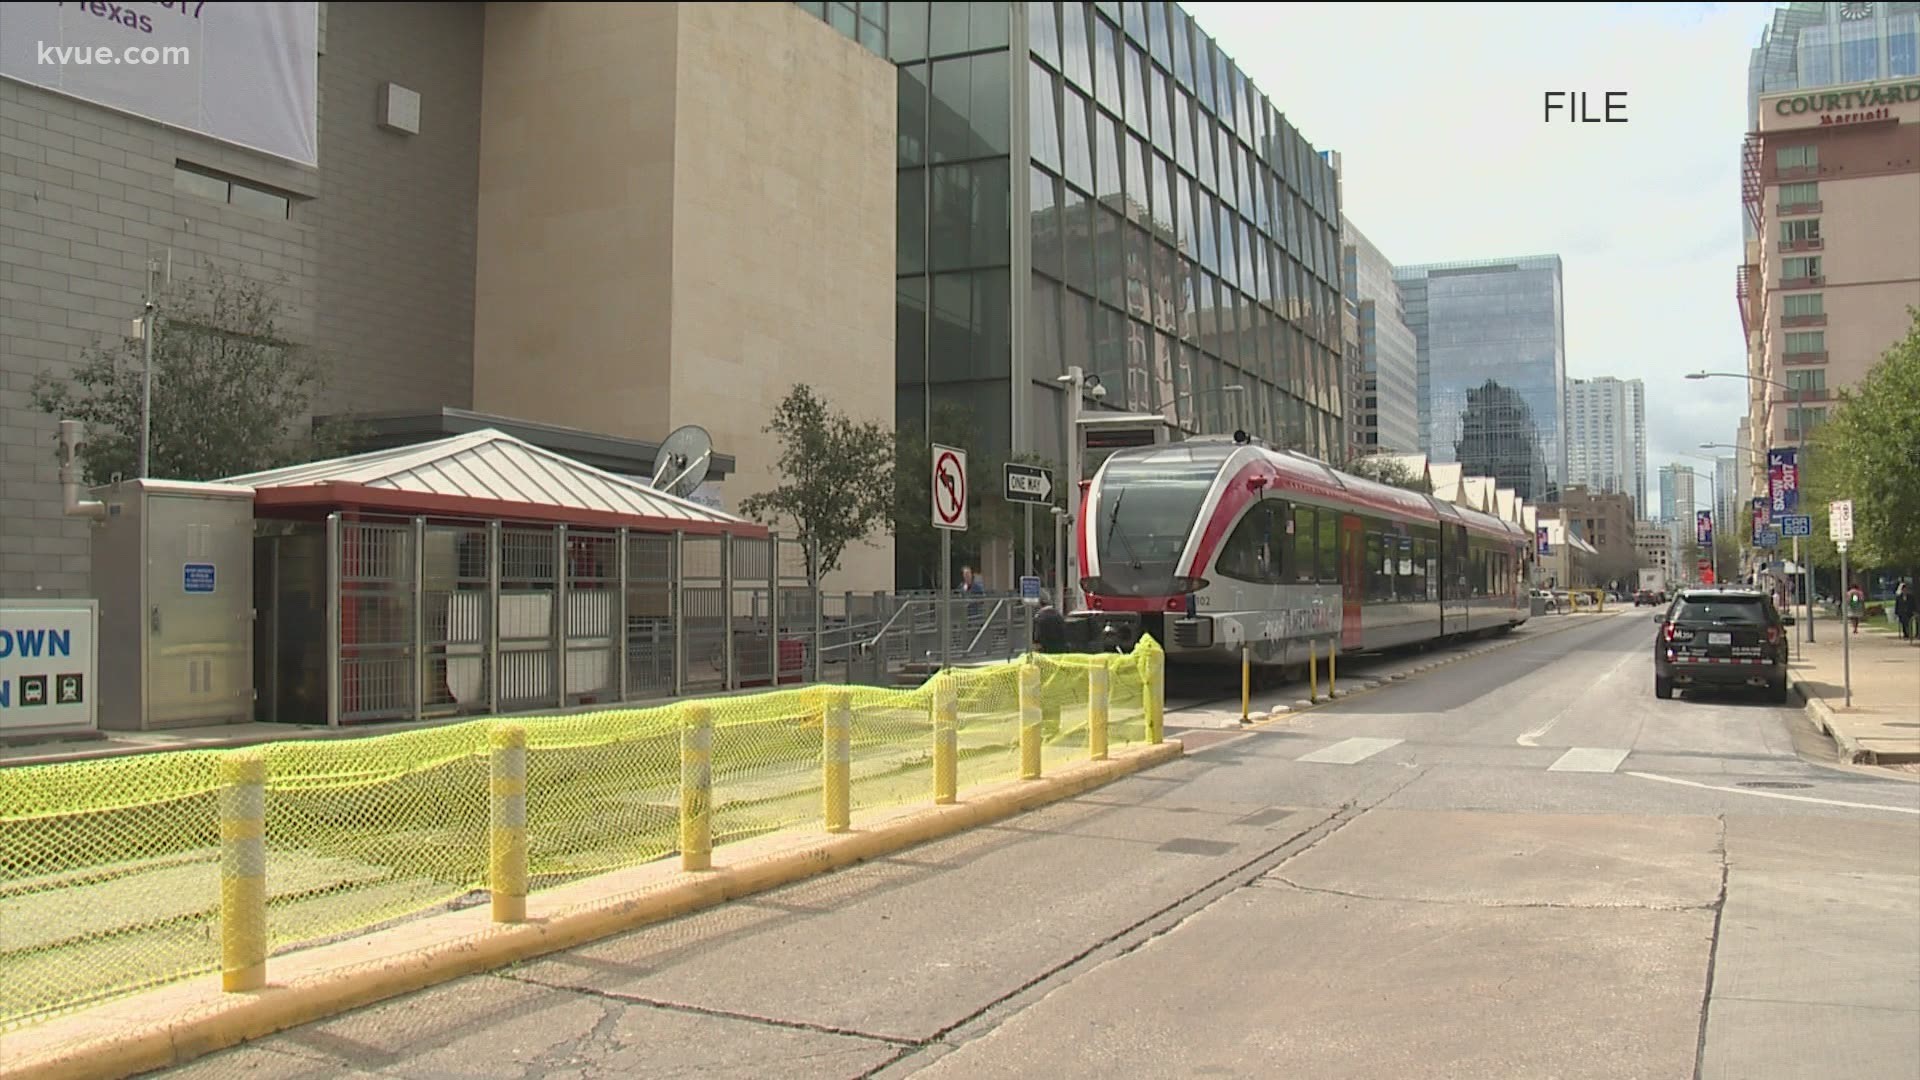 If you rely on CapMetro's Red Line to get around town, there are some upcoming changes that will affect your commute. KVUE's Bryce Newberry explains.